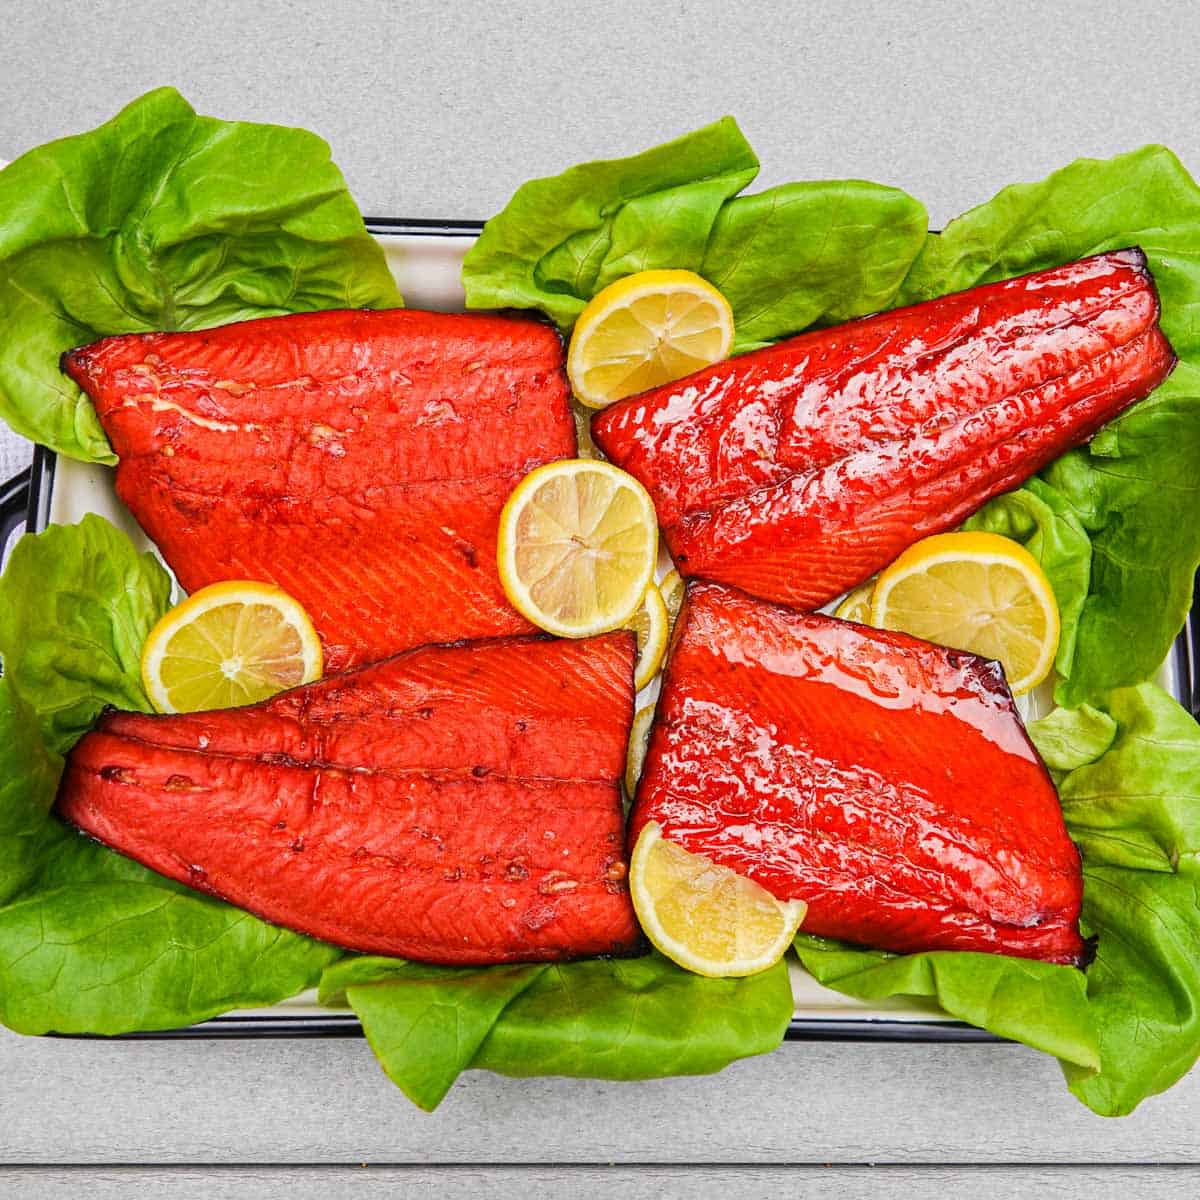 Smoked salmon on bed of lettuce with lemons